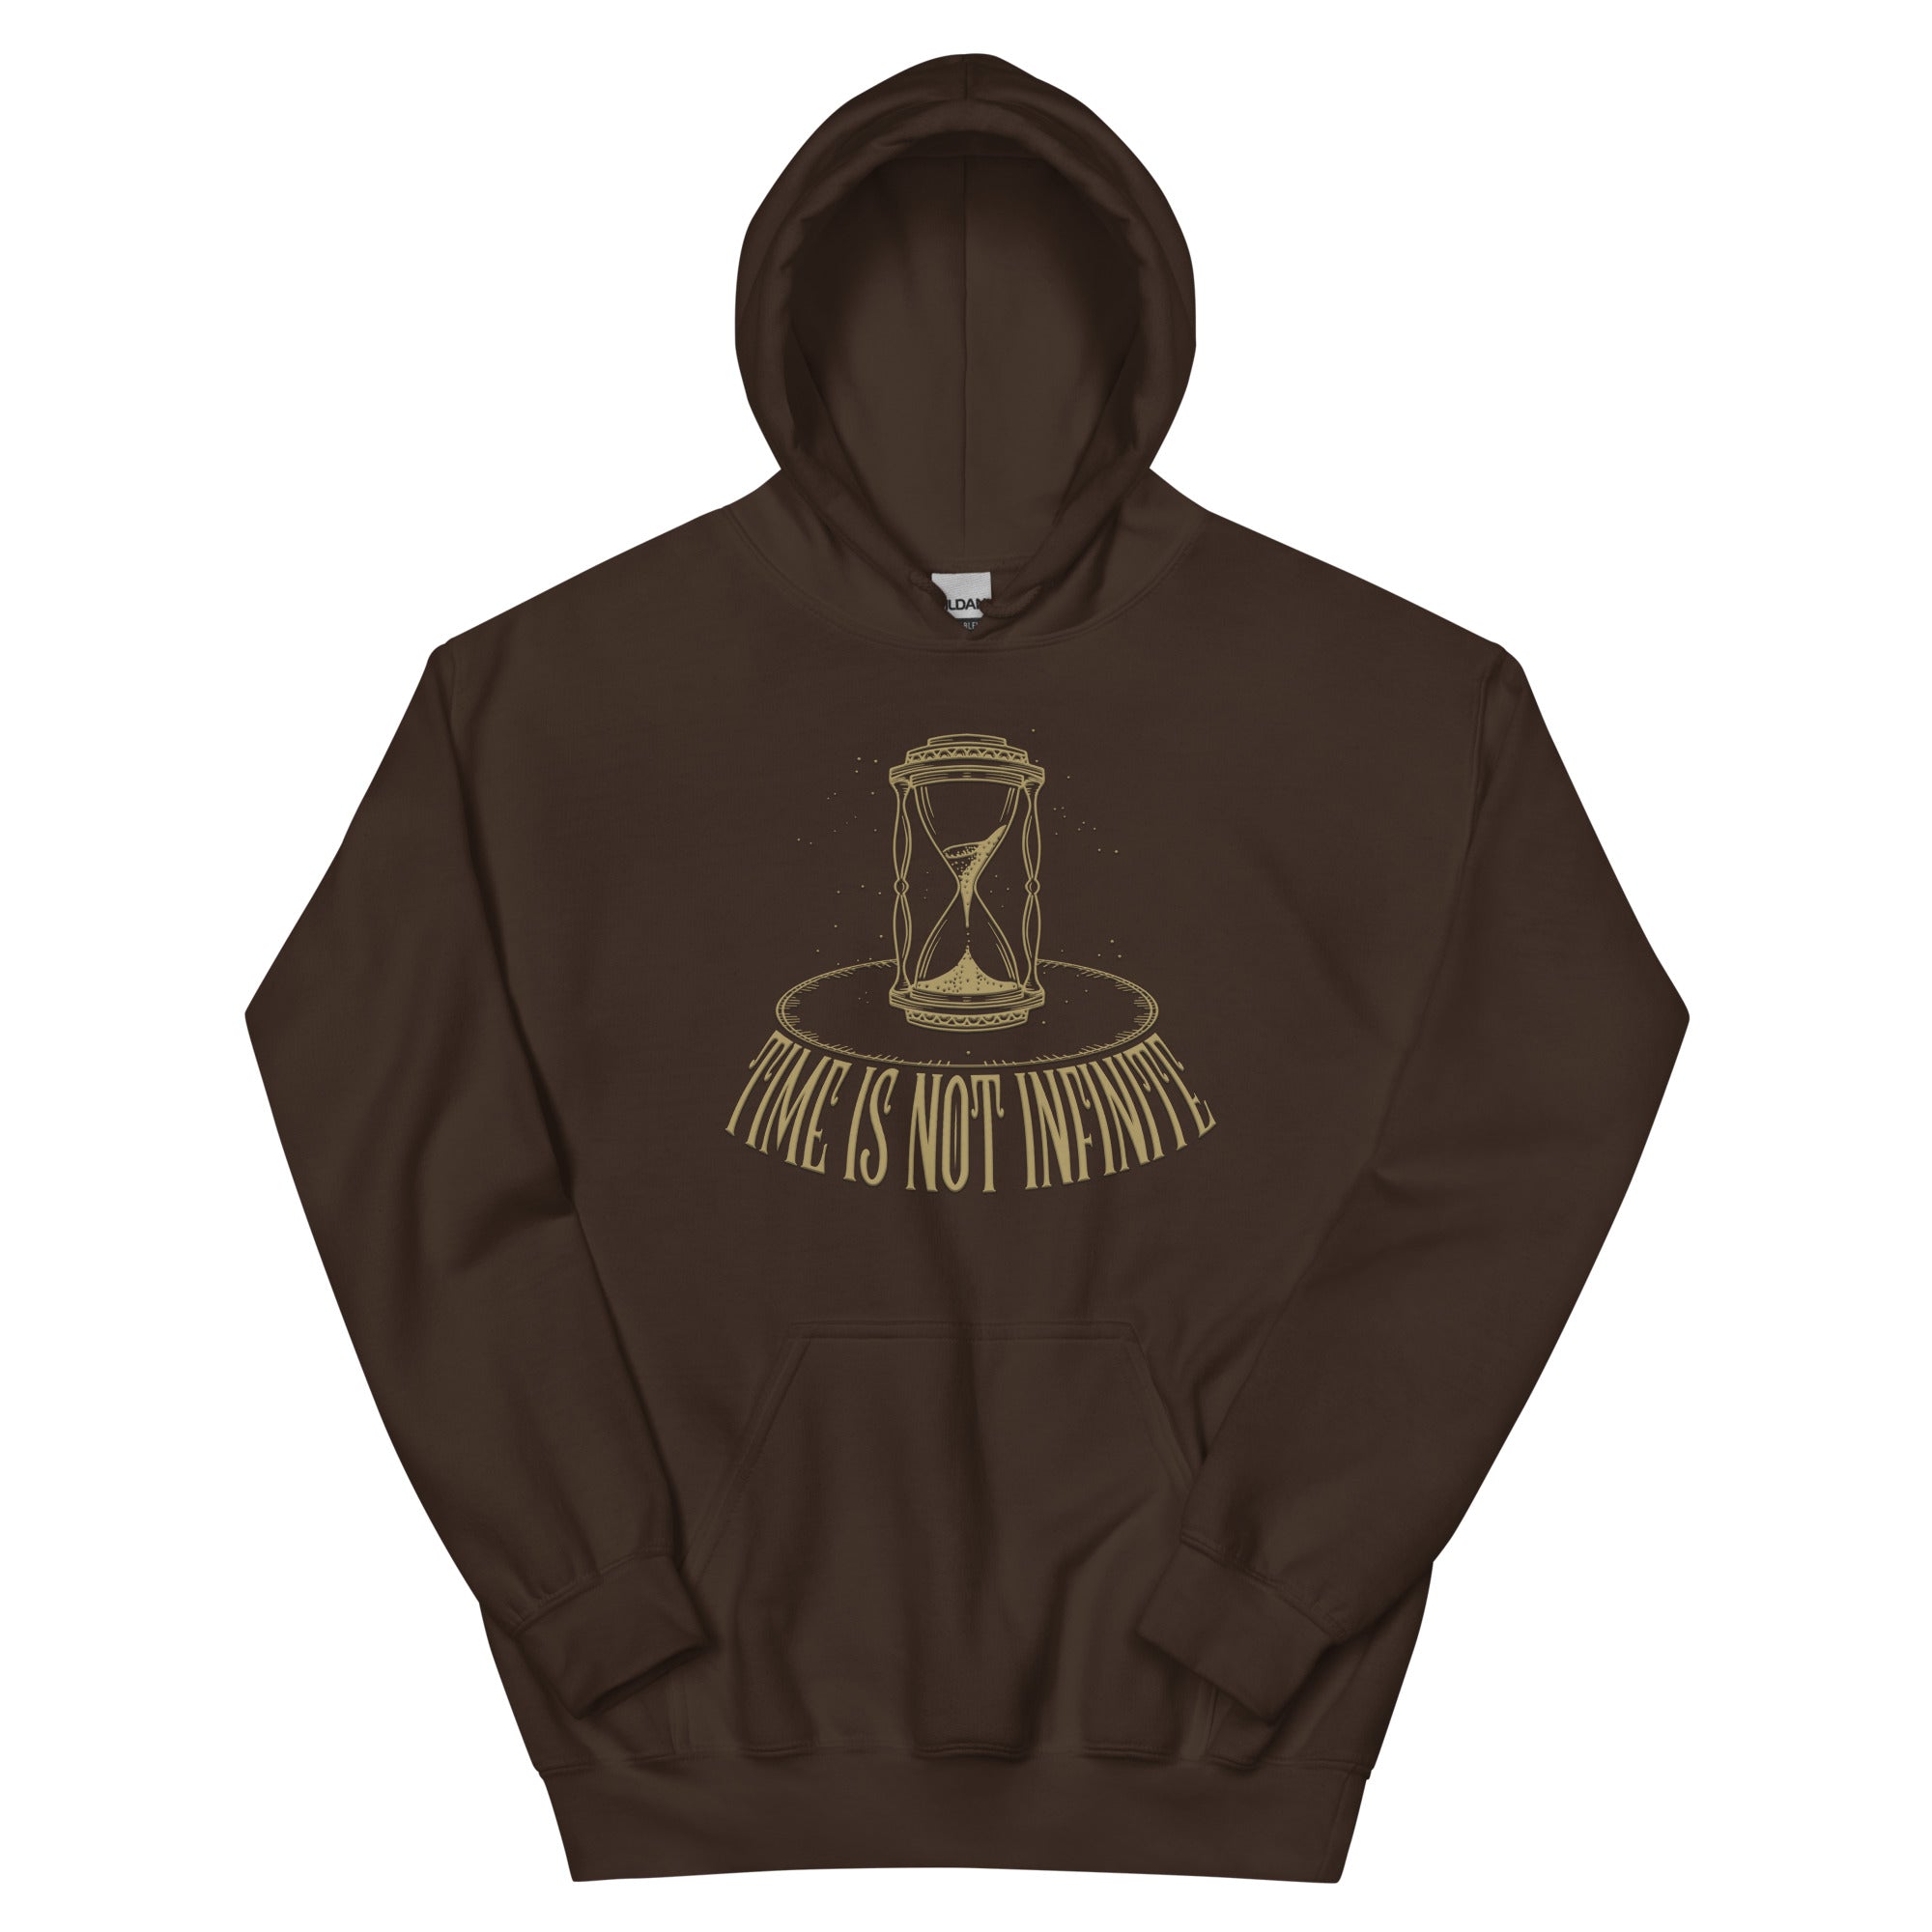 the time is not infinite hoodie. the color is brown with an hourglass signifying the loss of time in life 